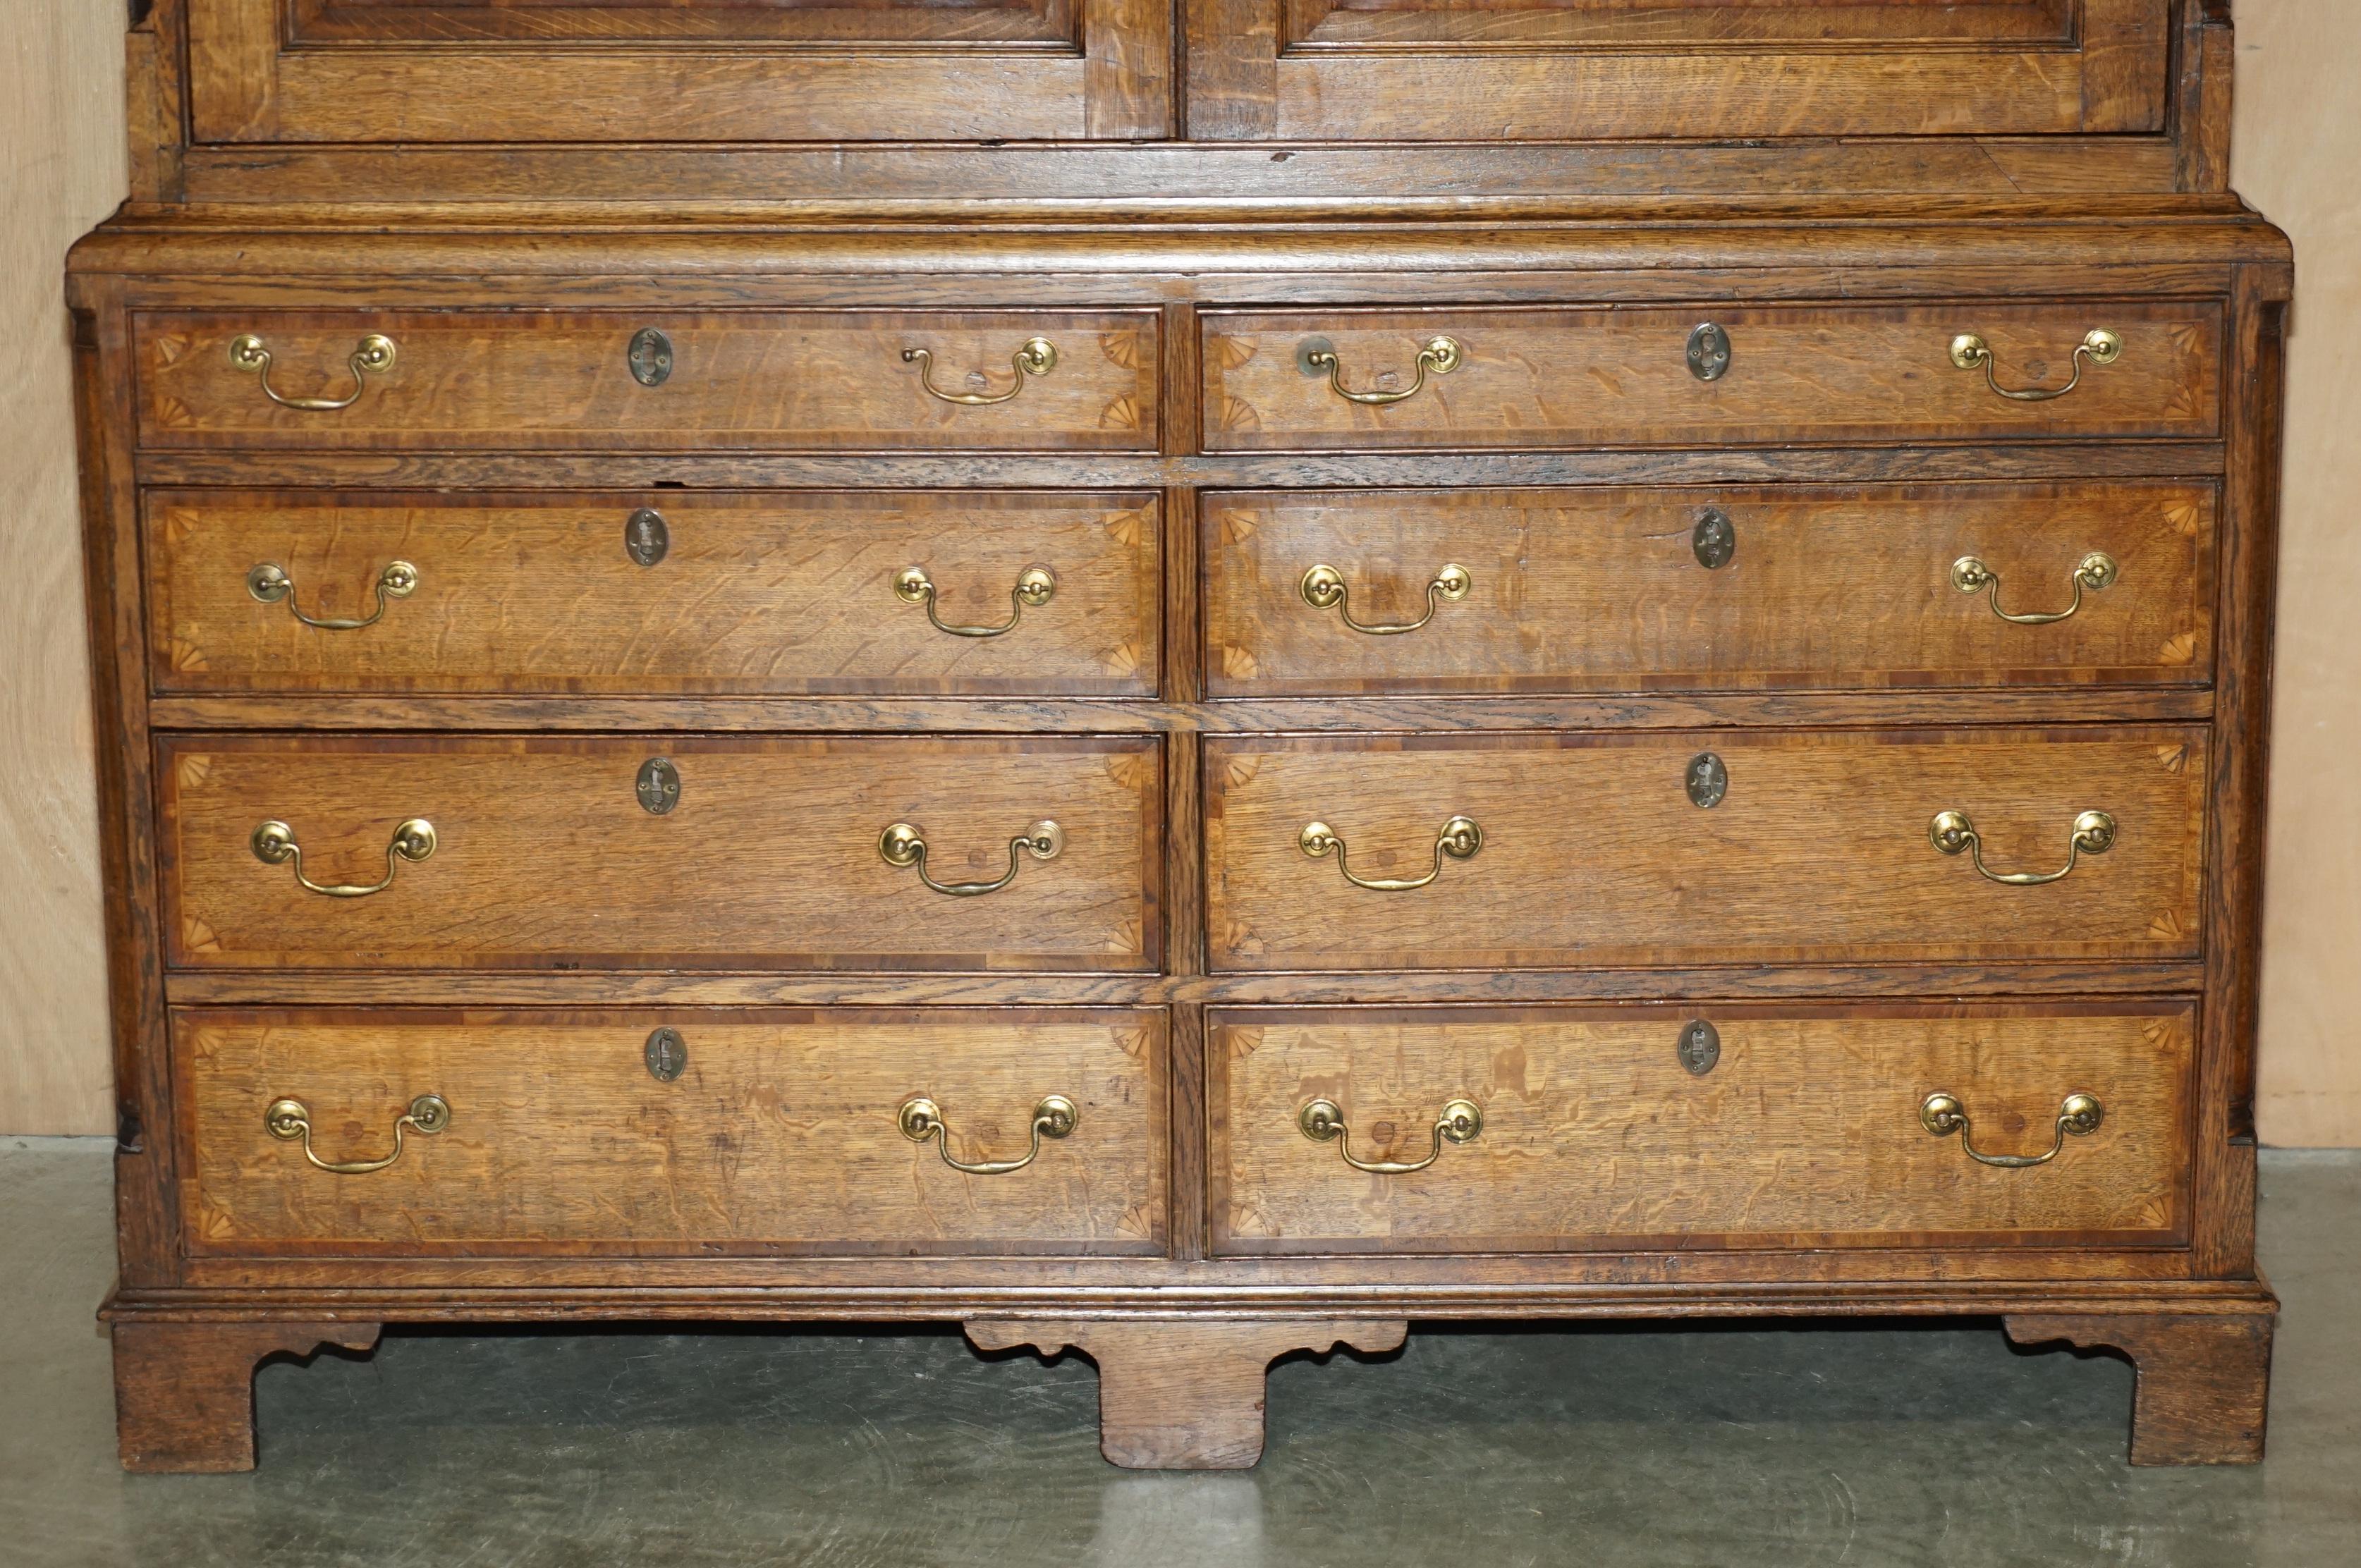 EXQUISITE ANTiQUE 1800 SHERATON INLAID HOUSEKEEPERS CUPBOARD WARDROBE DRAWERS For Sale 1